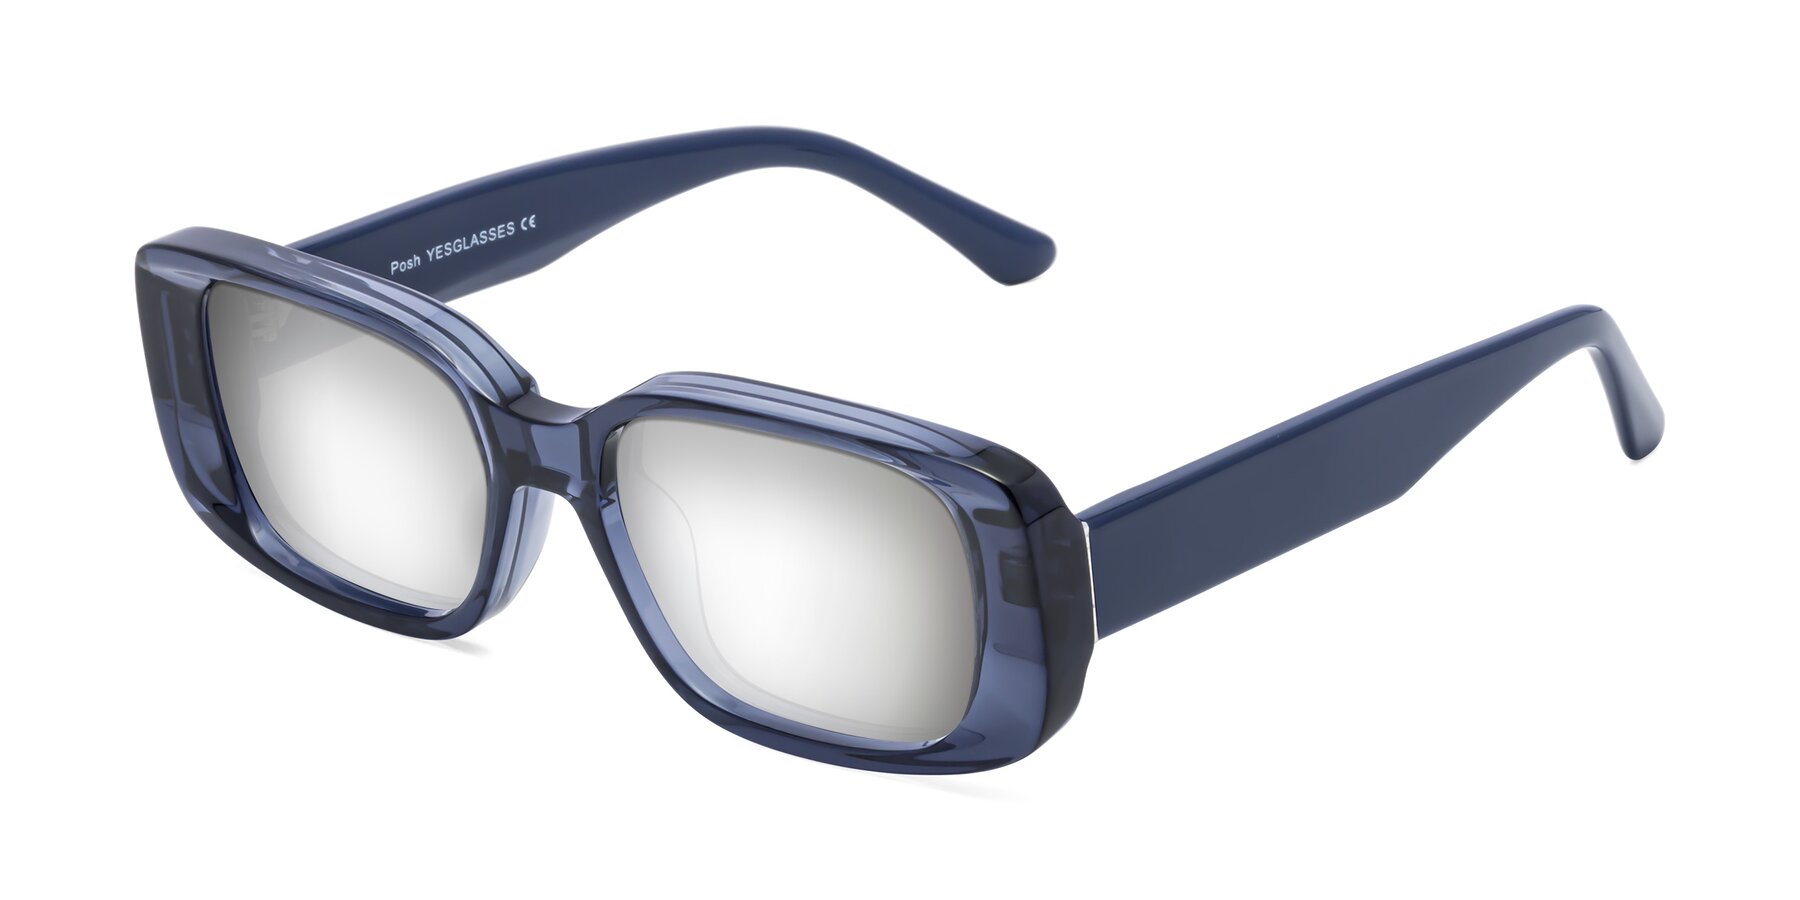 Angle of Posh in Translucent Blue with Silver Mirrored Lenses